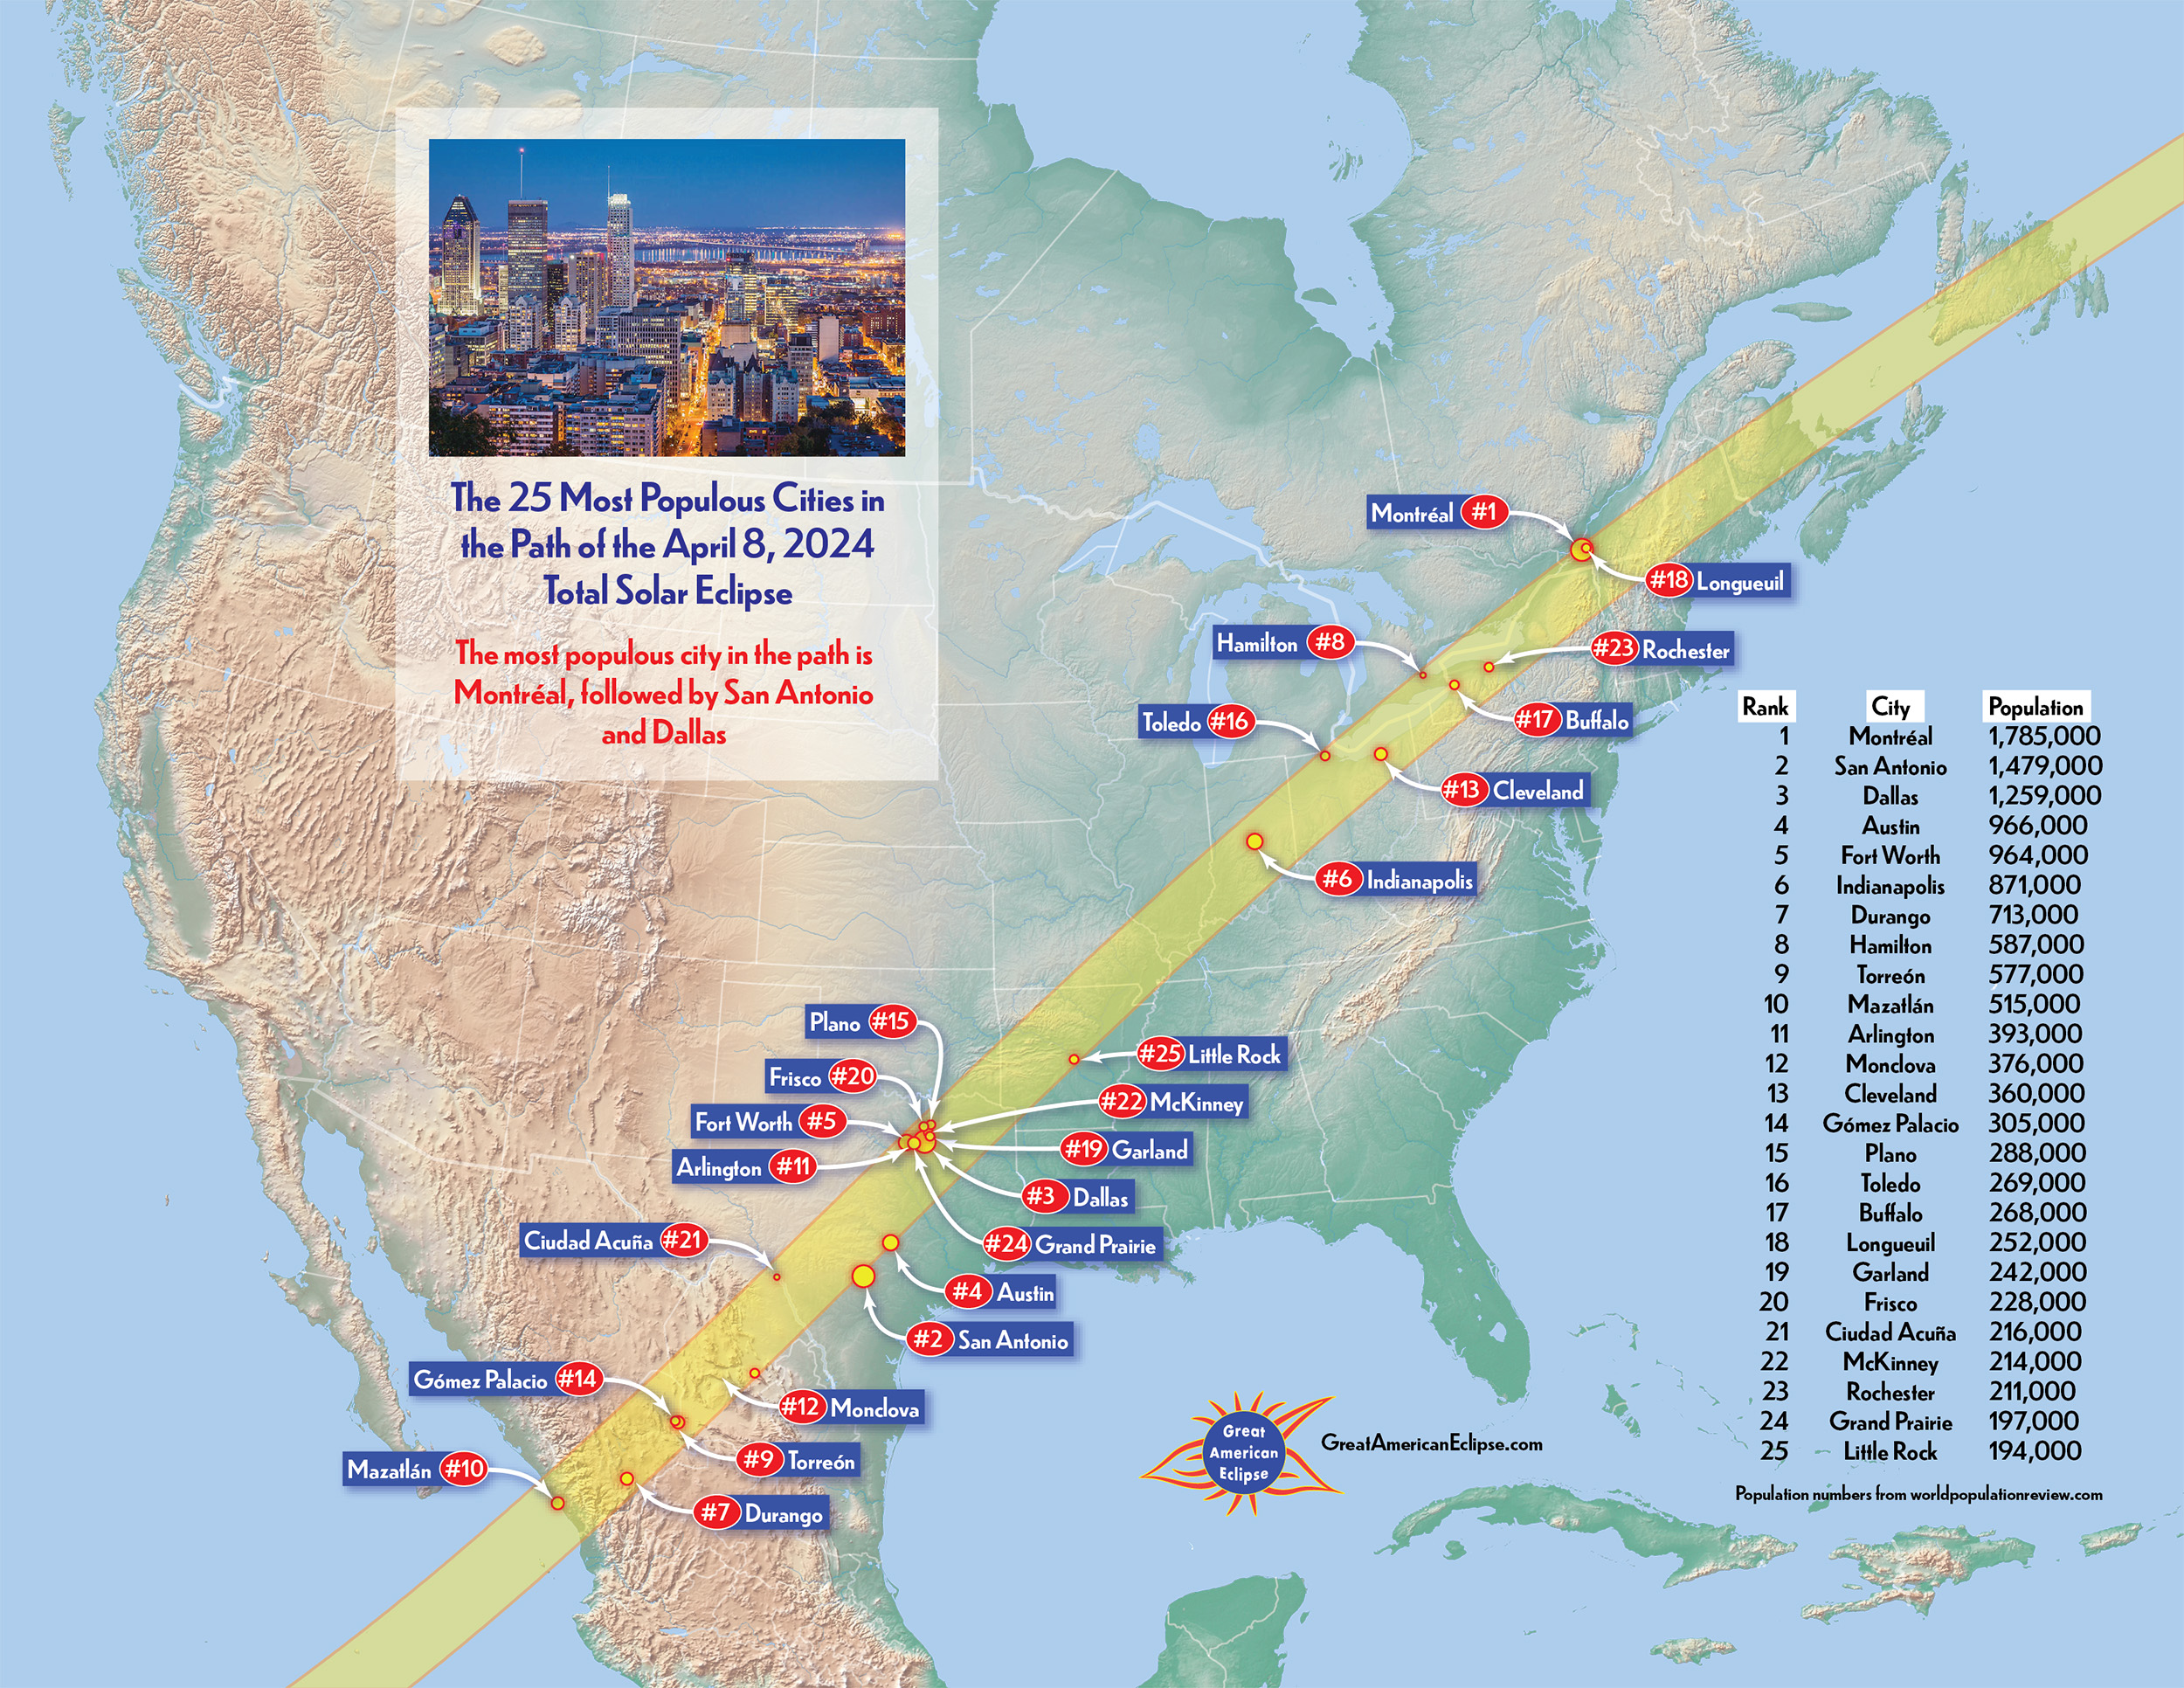 A map showing the 10 largest cities on the path of the April 8, 2024 eclipse